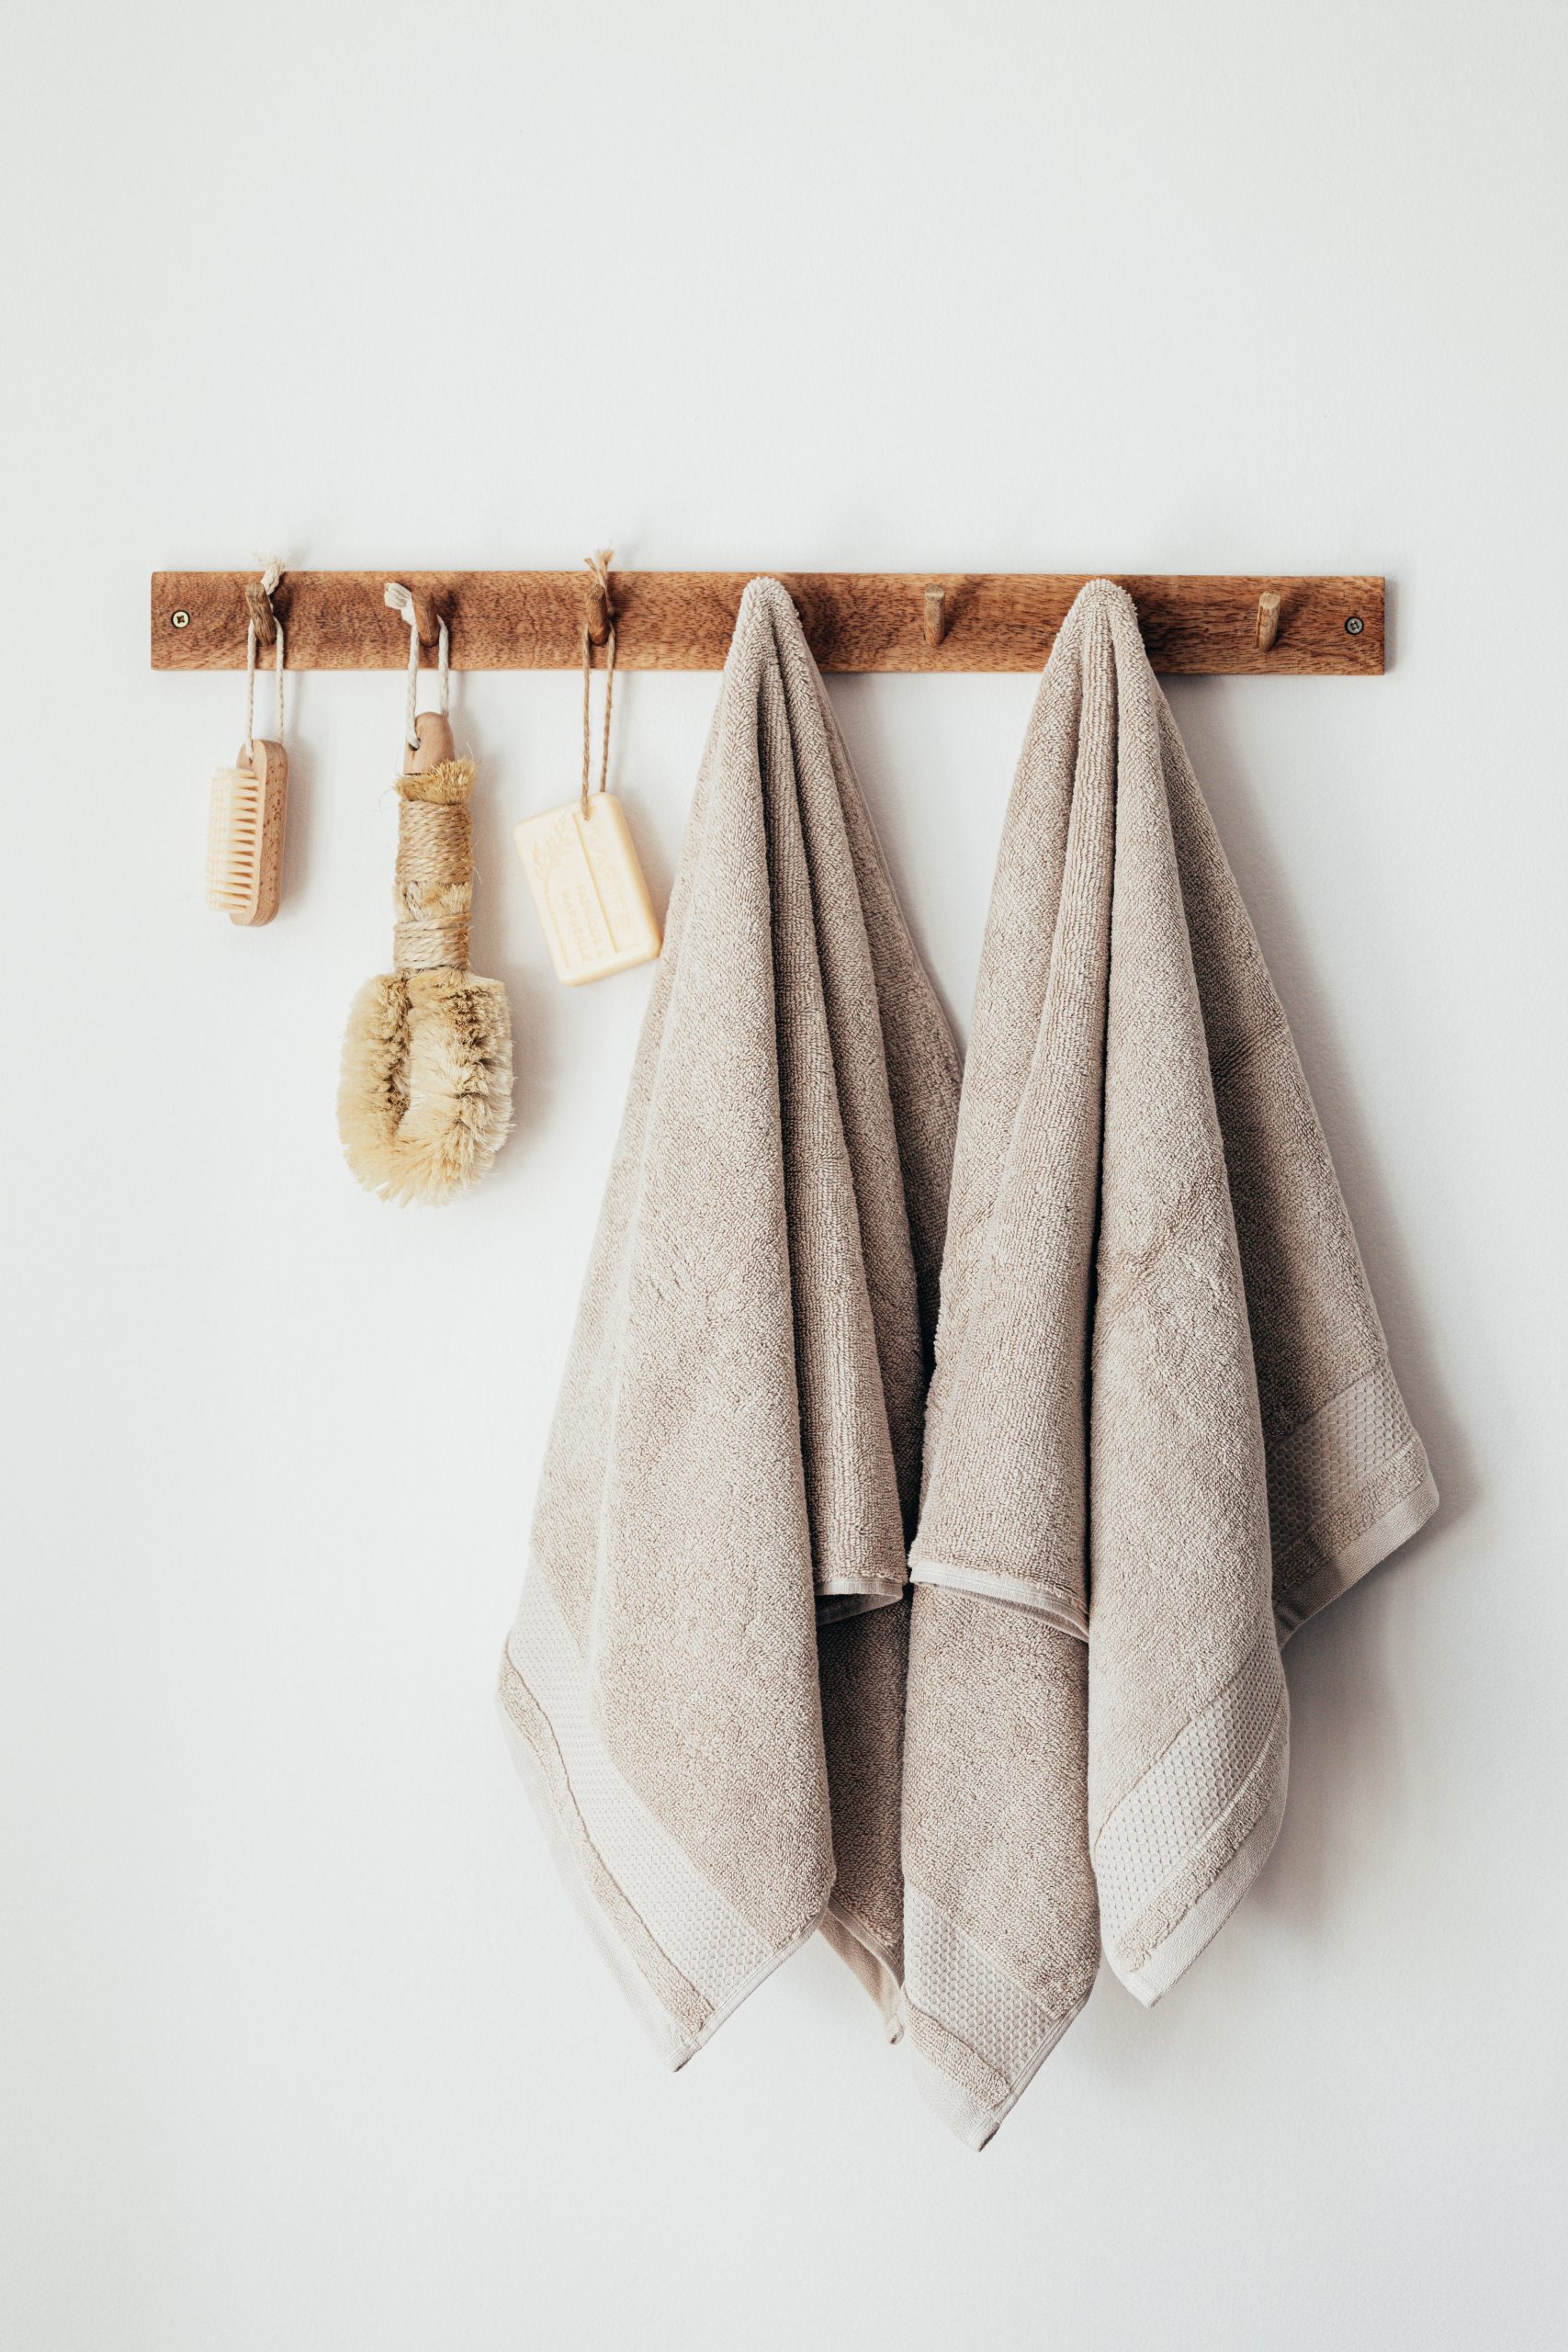 Towels hanging on wall hooks